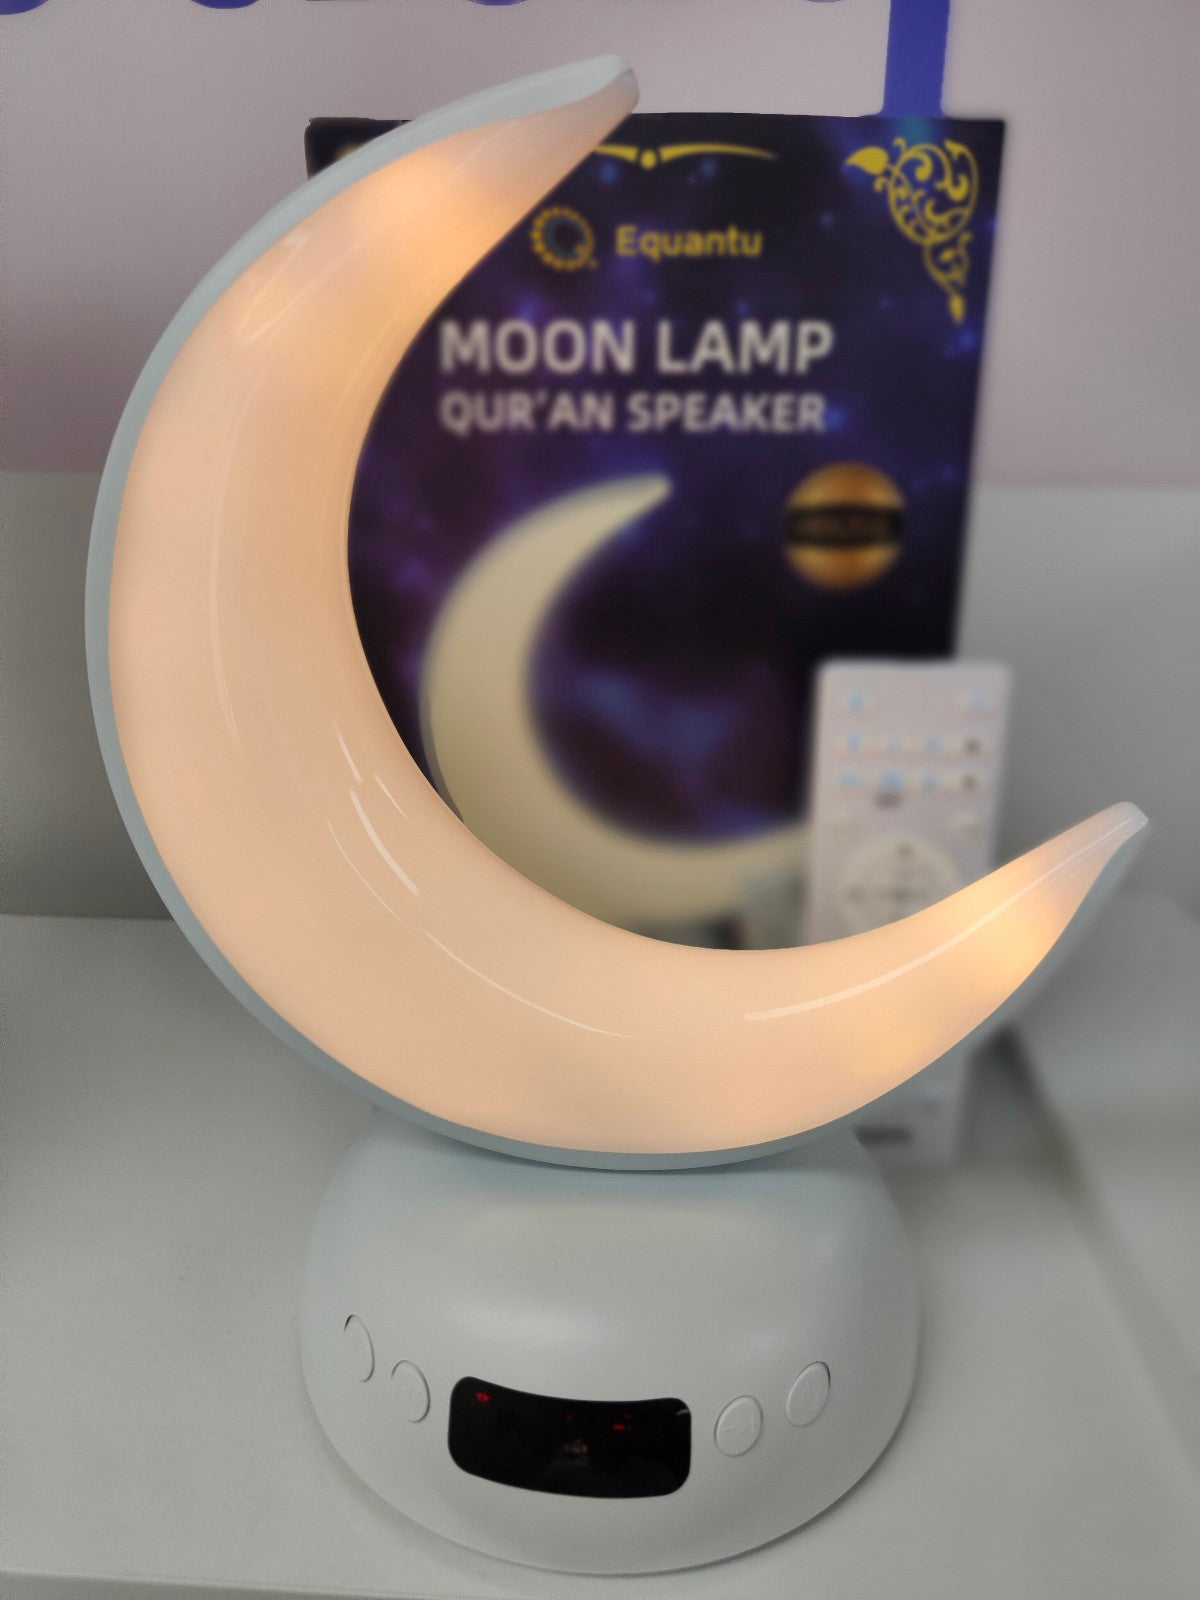 This Quran Speaker from Hikmah Boutique has all the features you are looking for! It has built-in Azan Clock, Bluetooth Connection, Beautiful Crescent shaped lamp and has wireless speaker to play Quran recitation in various reciters voice. The built-in azan clock reminds you to pray your salah.